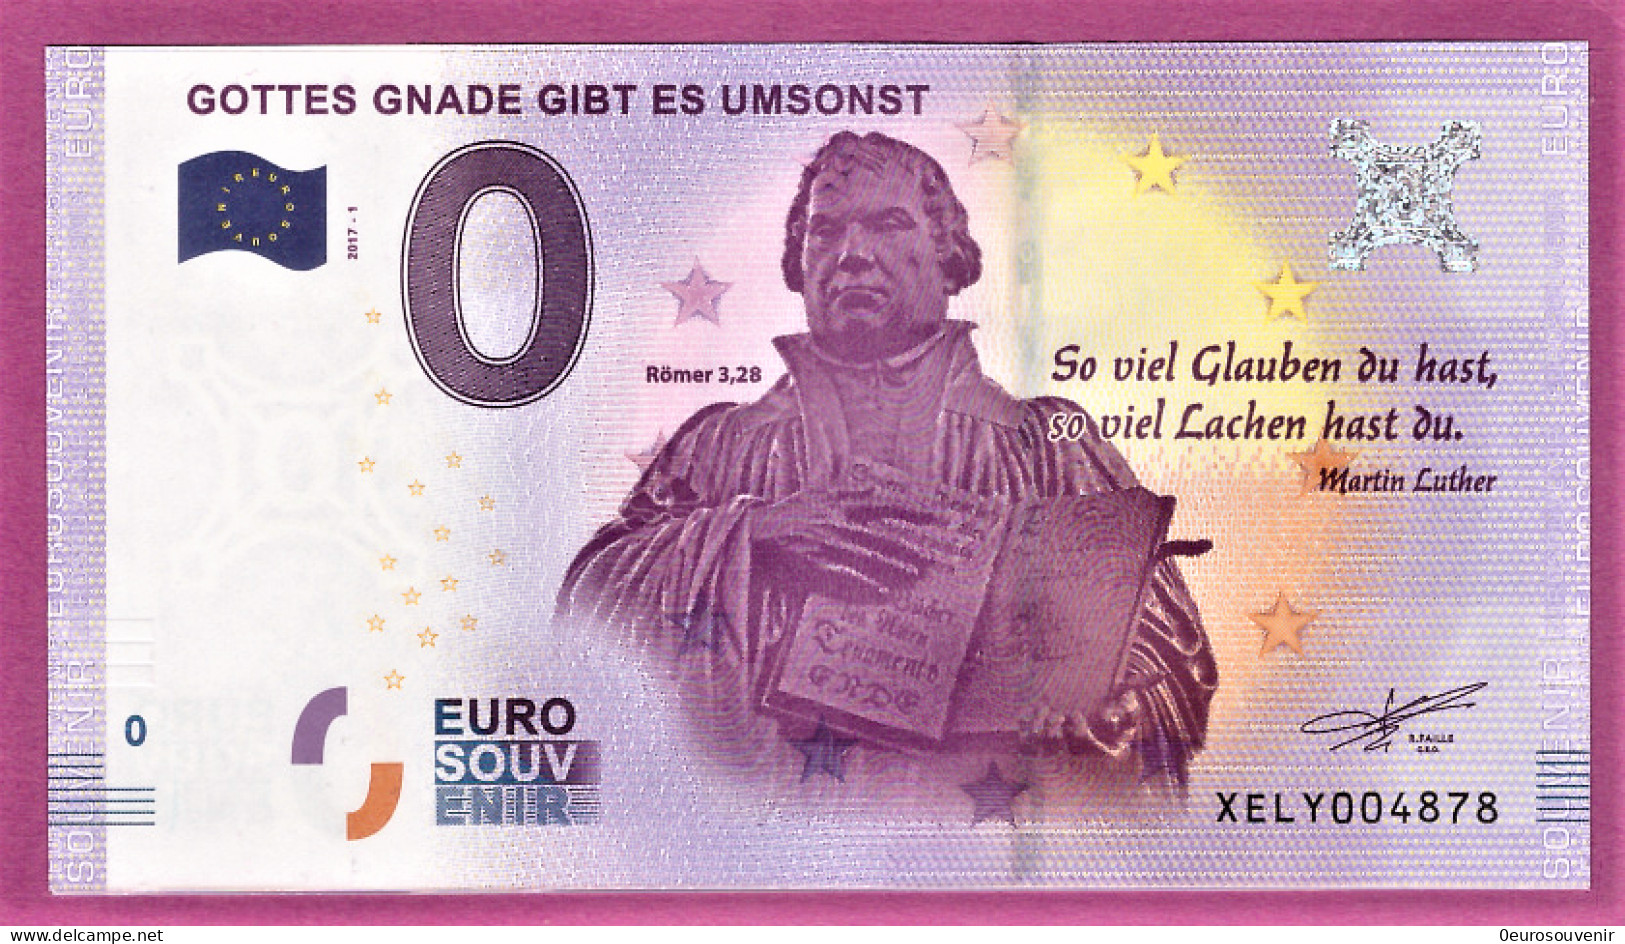 0-Euro XELY 2017-1 /2 GOTTES GNADE GIBT ES UMSONST - MARTIN LUTHER  S-2b Kupfer - Private Proofs / Unofficial